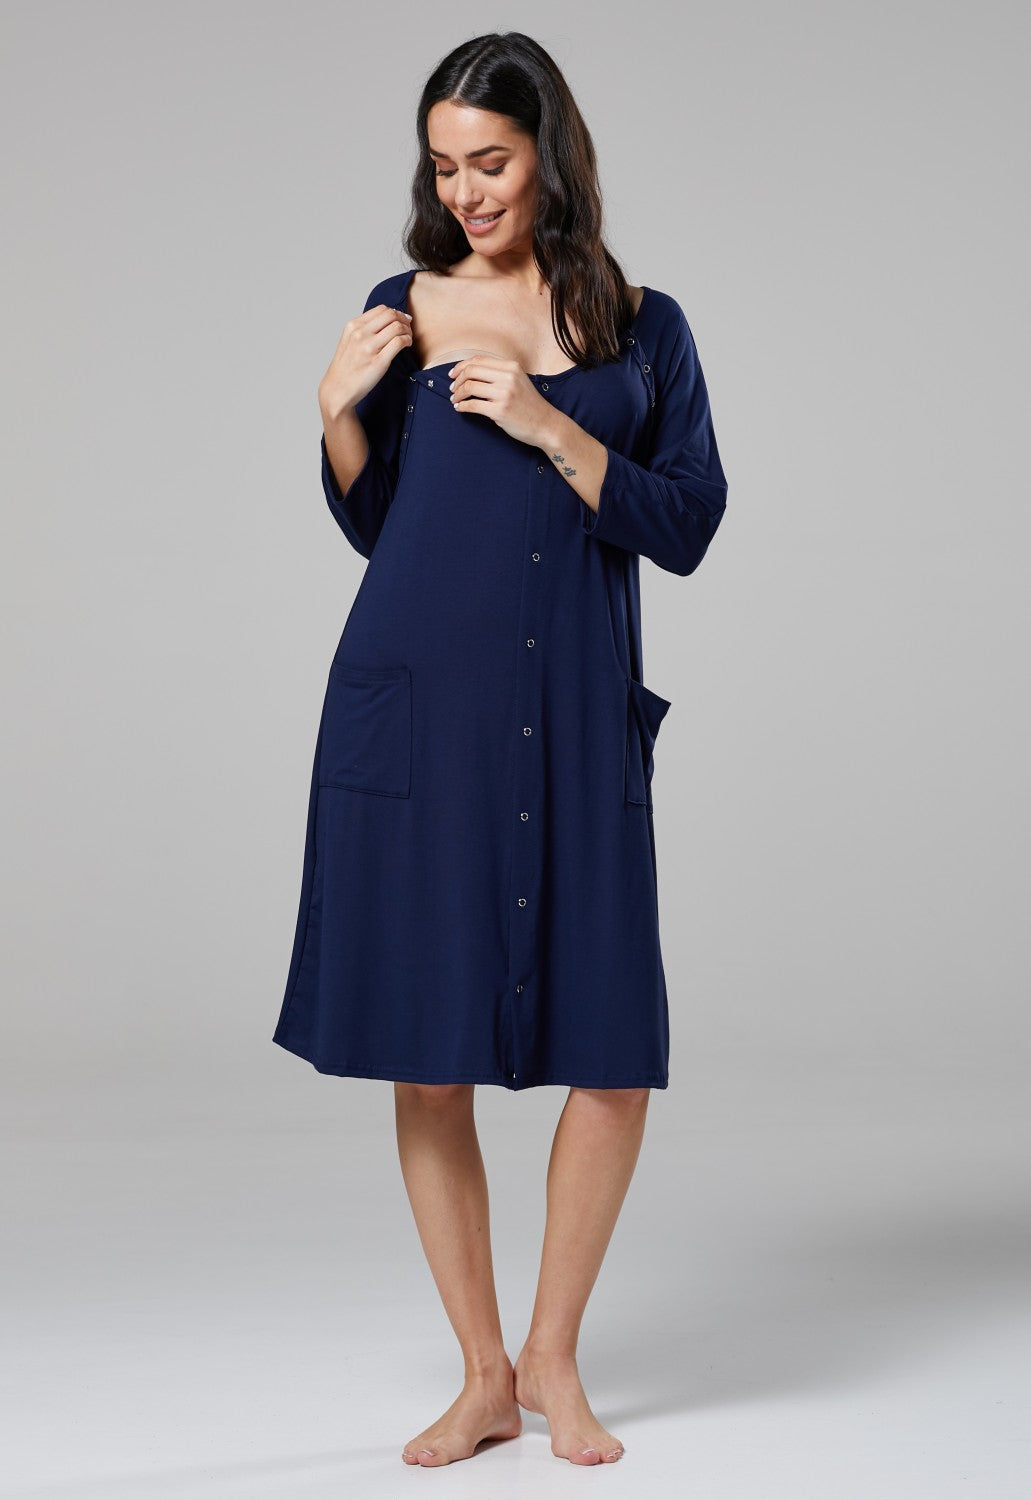 Stylish and Comfortable Maternity Hospital Gowns